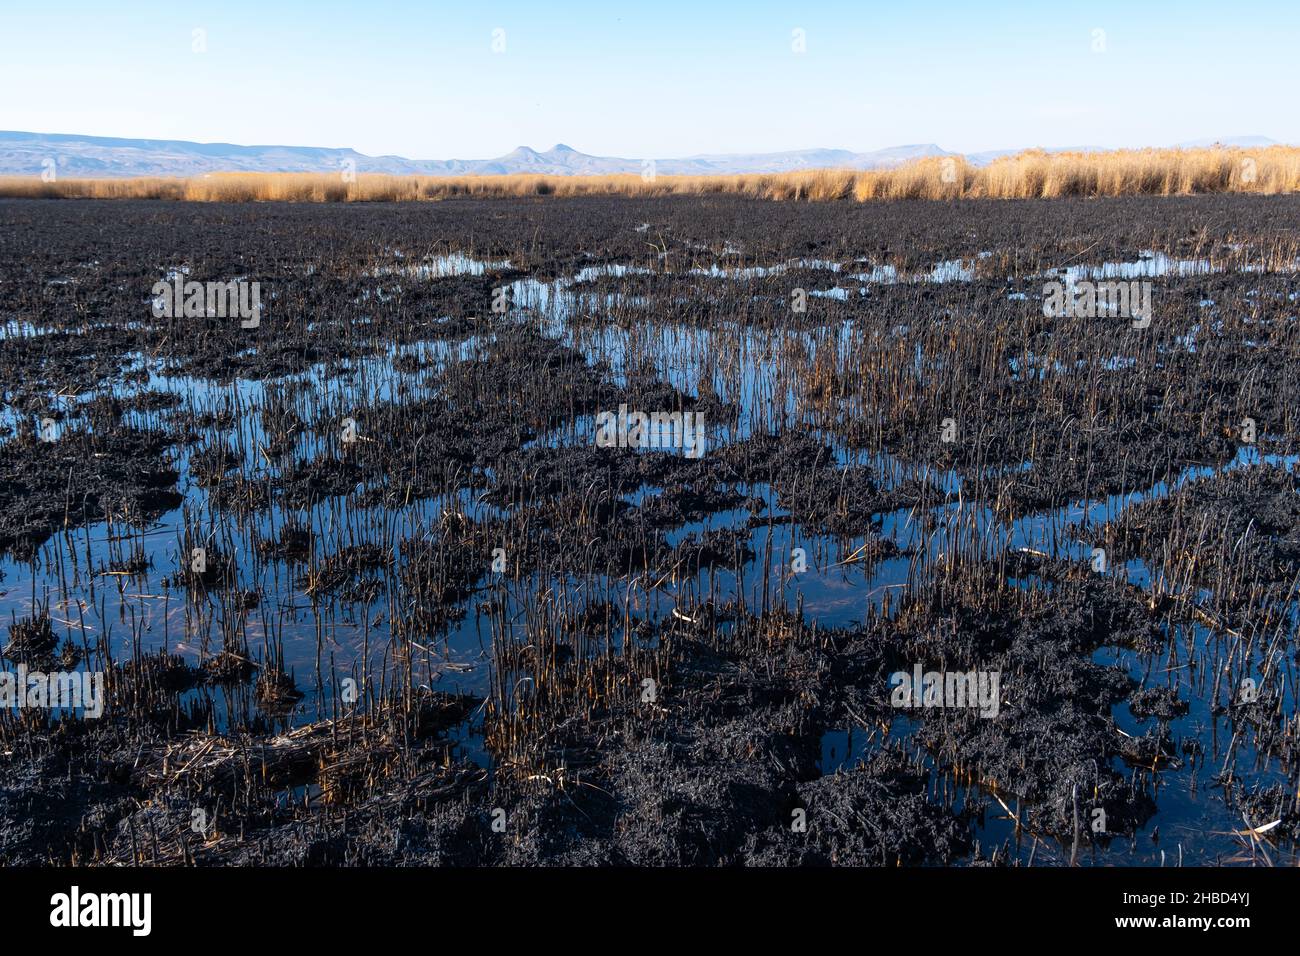 Spring fire, burnt field. Destruction of nature. Fires caused by global warming. Stock Photo